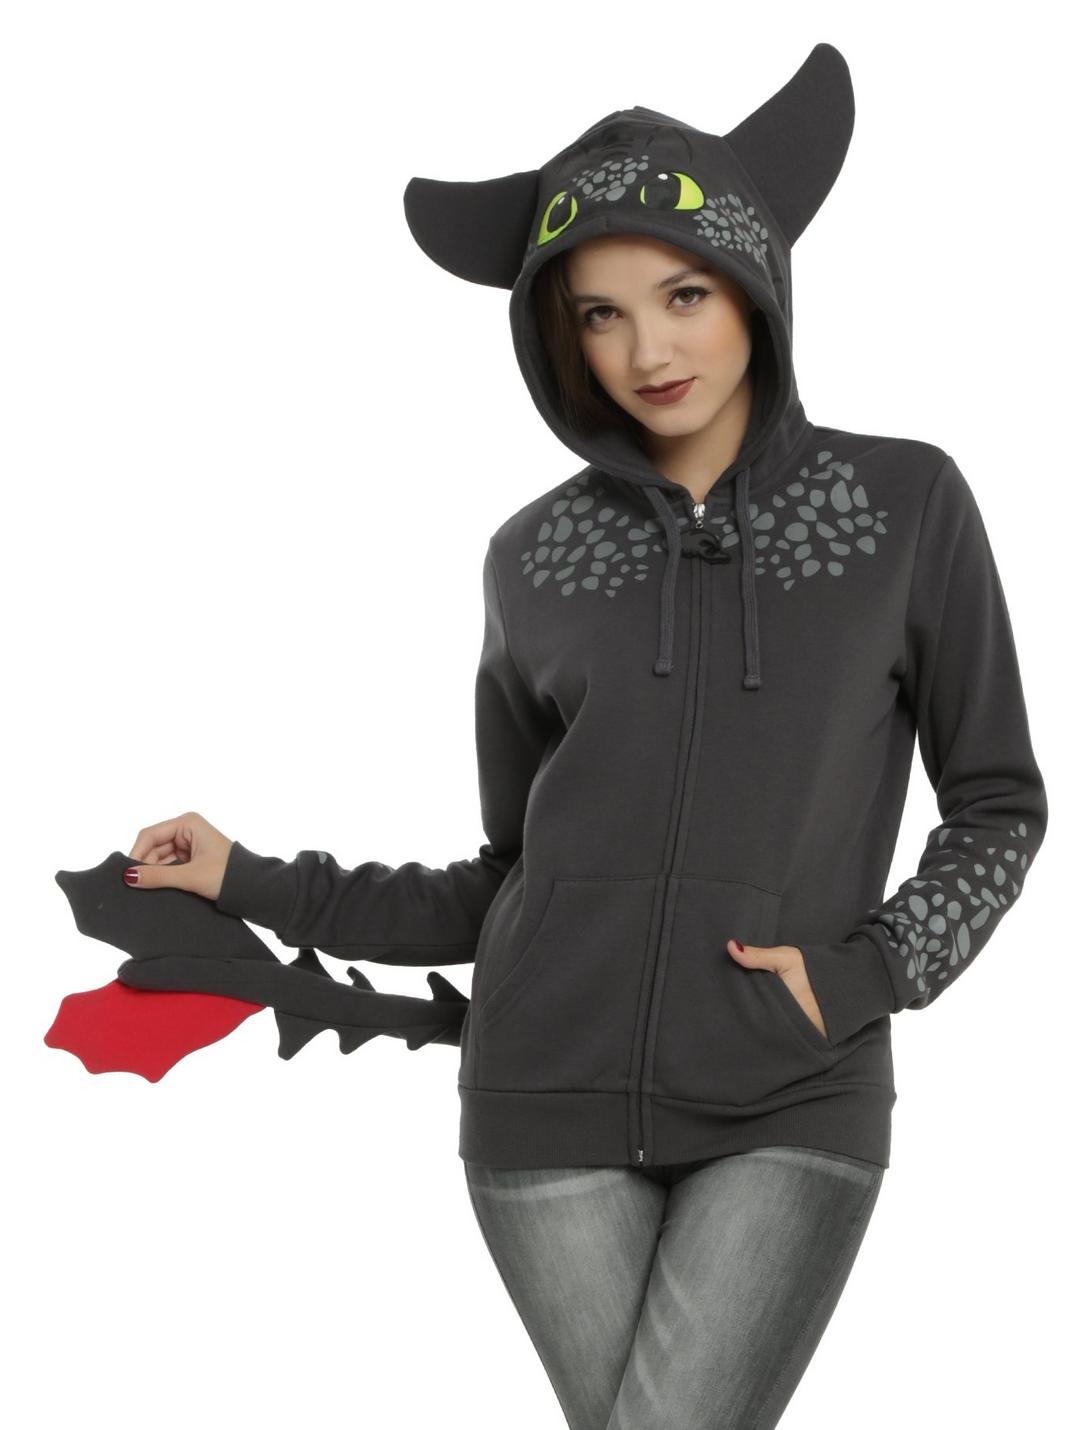 How To Train Your Dragon Toothless Cosplay Girls Hoodie, BLACK, hi-res